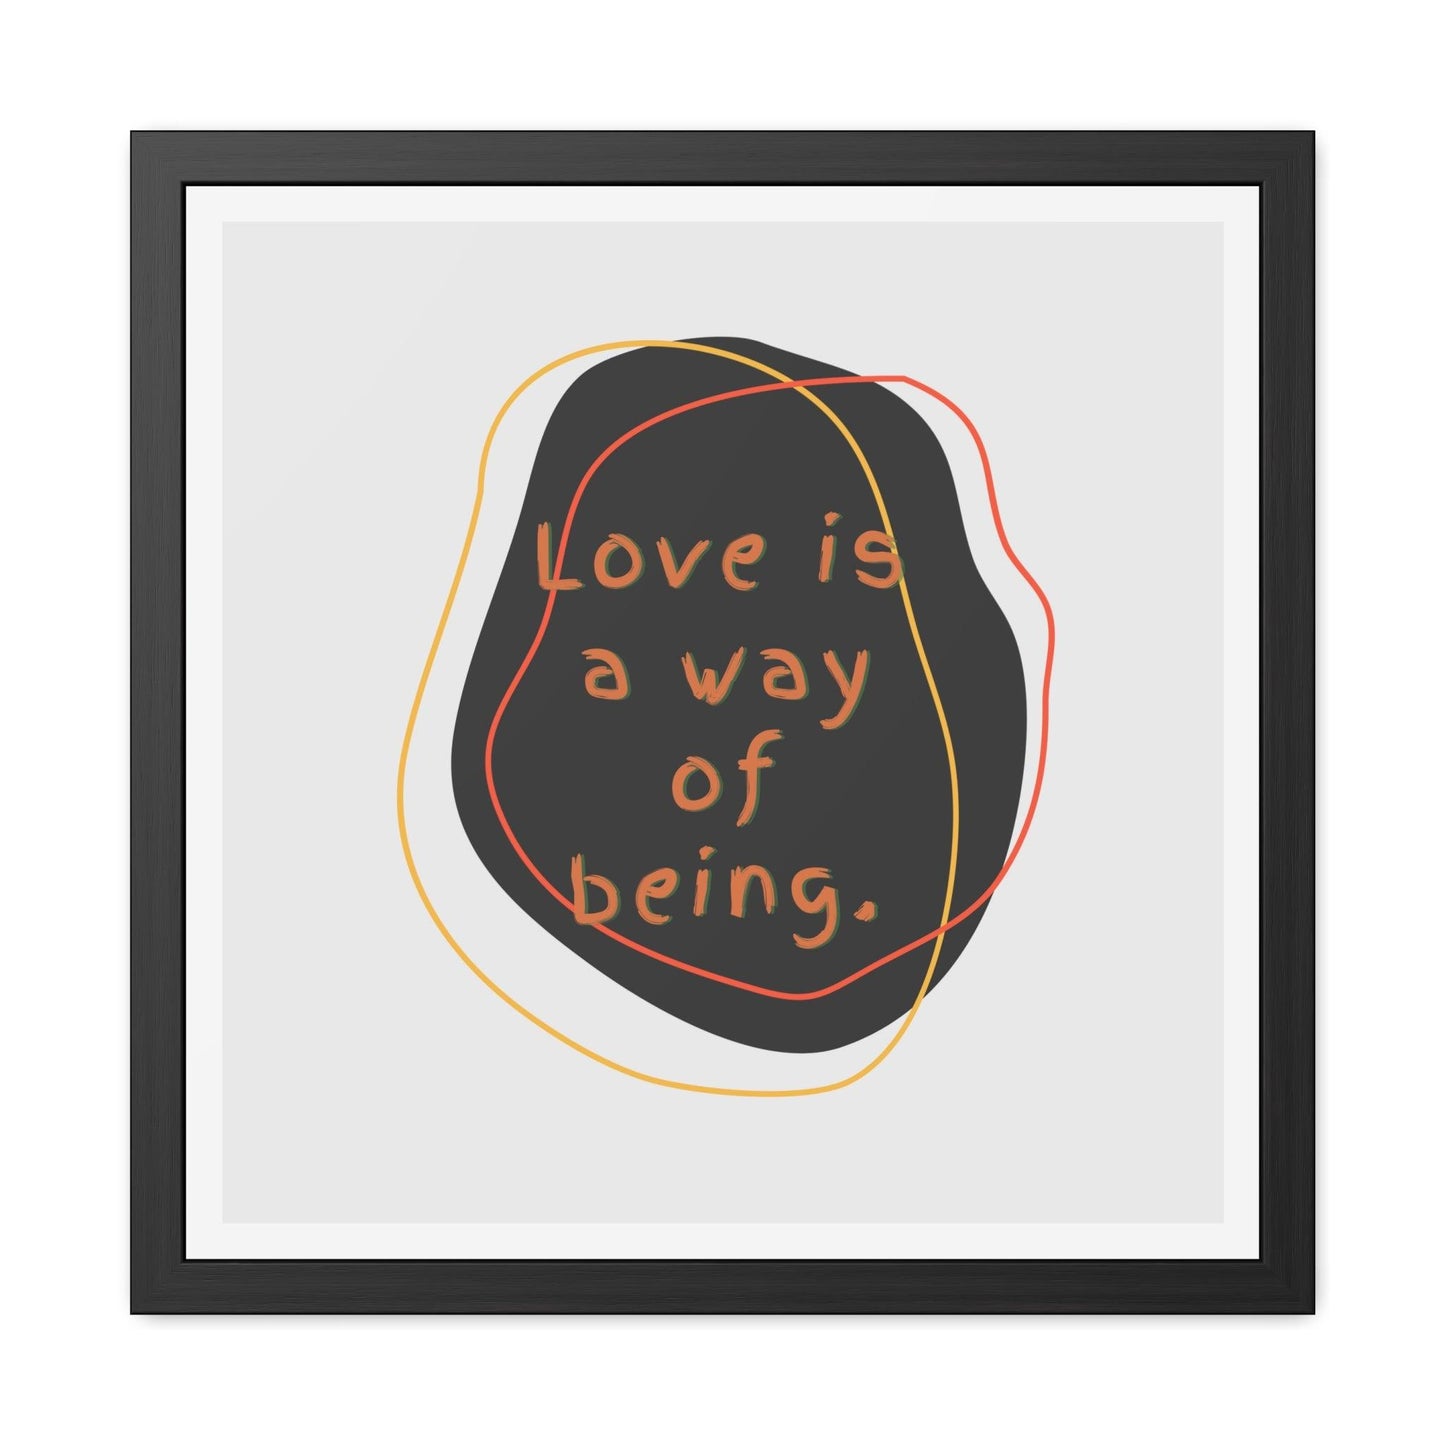 Love is a way of being Black Framed Poster Wall Art - MAIA HOMES